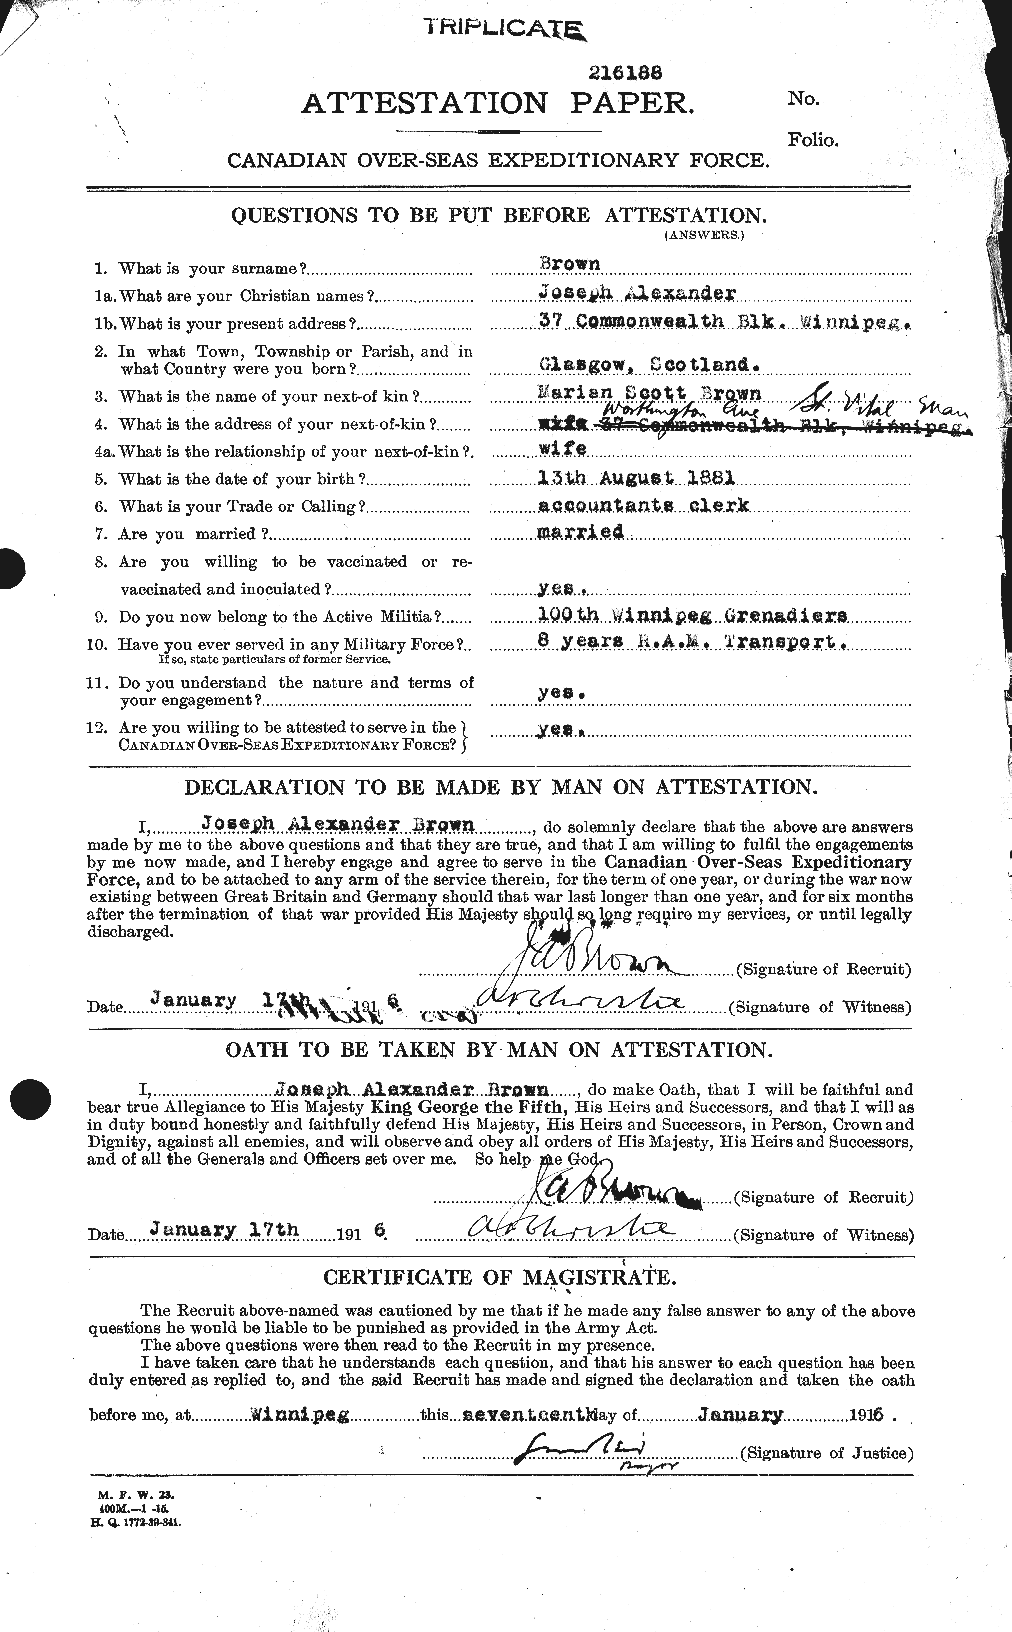 Personnel Records of the First World War - CEF 265784a